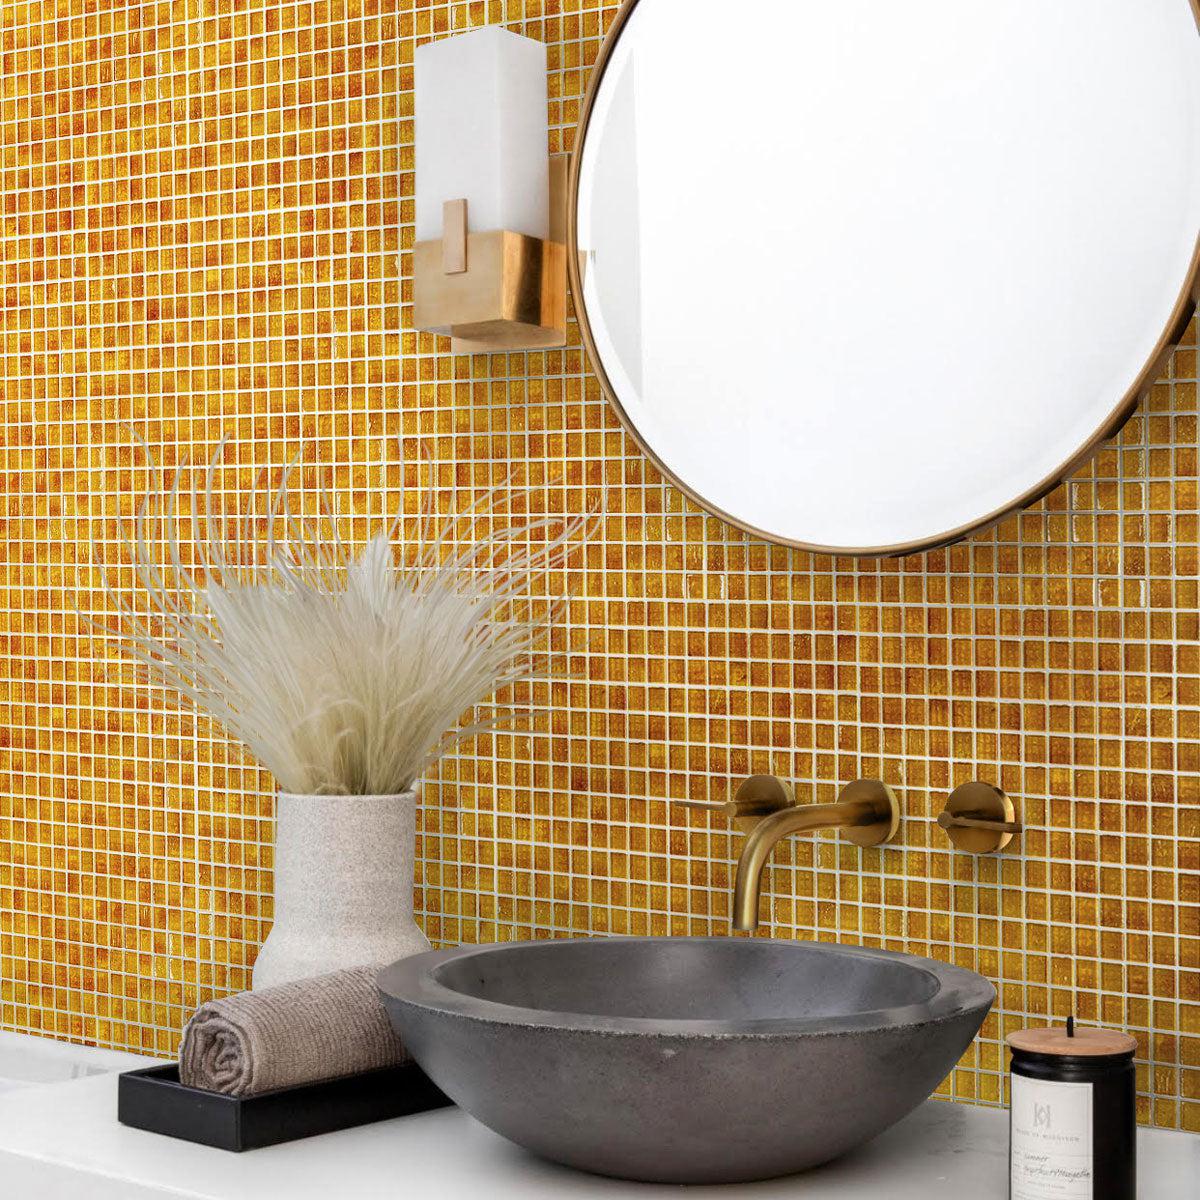 Golden Brown Squares Glass Tile creates a warm and inviting bathroom oasis